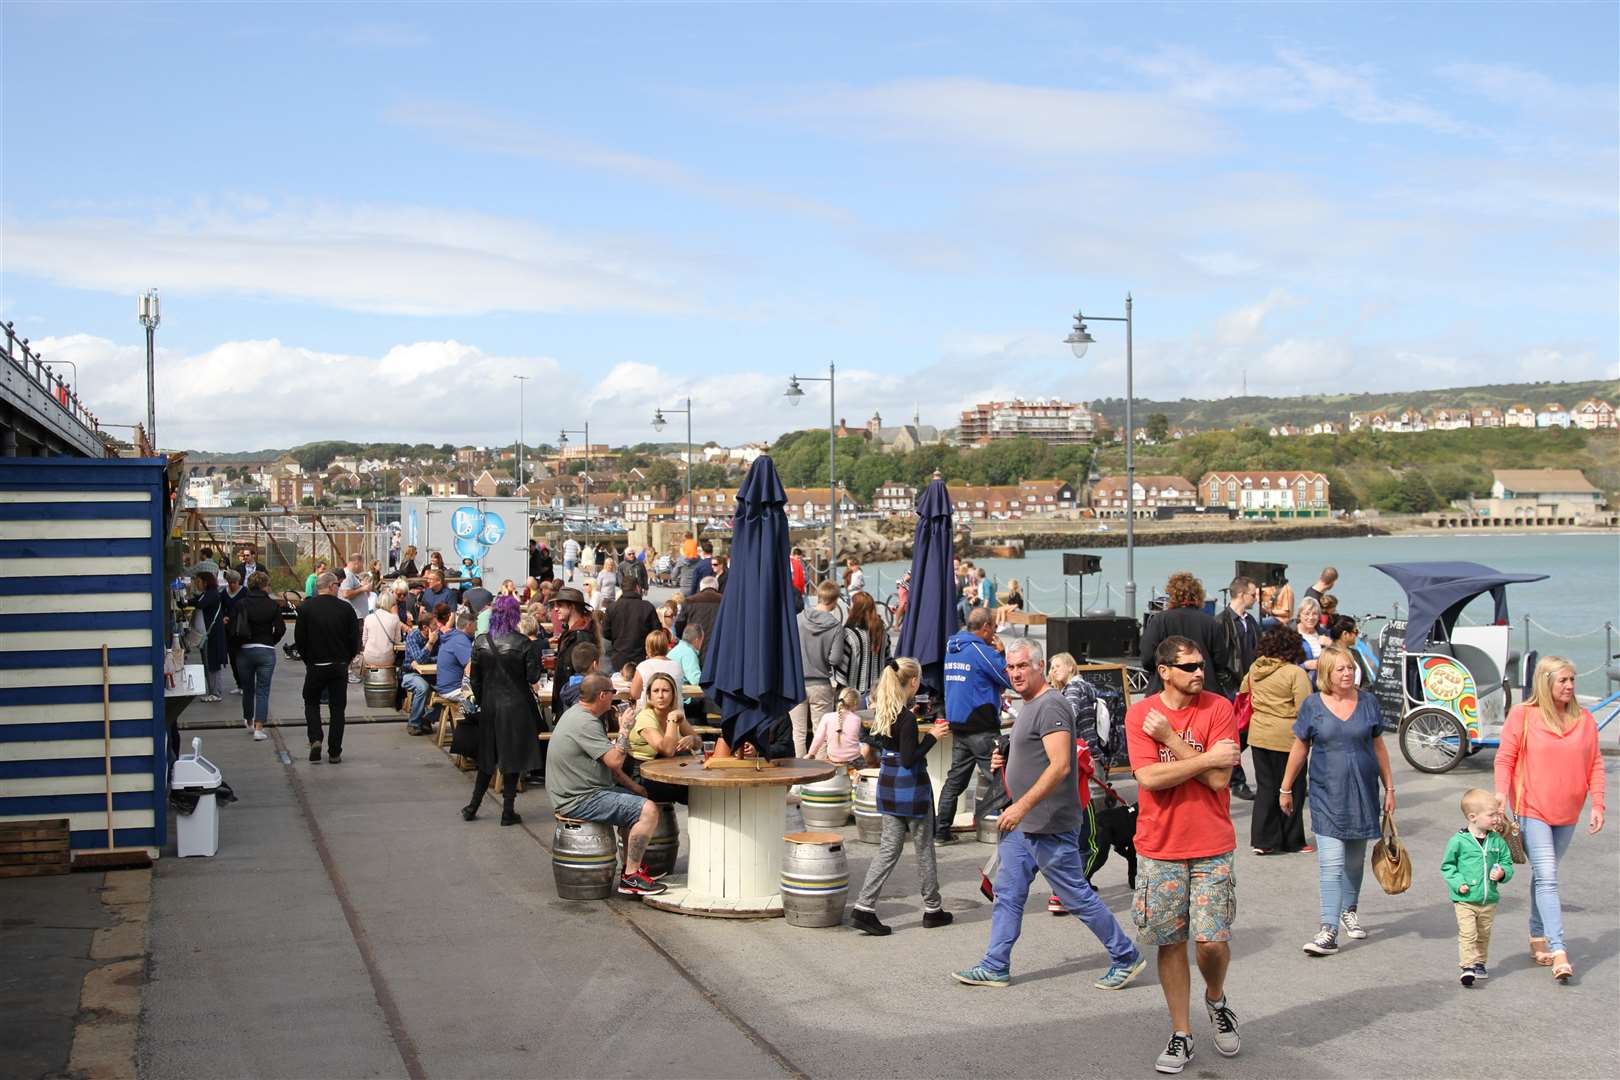 The harbour arm reopens on March 18